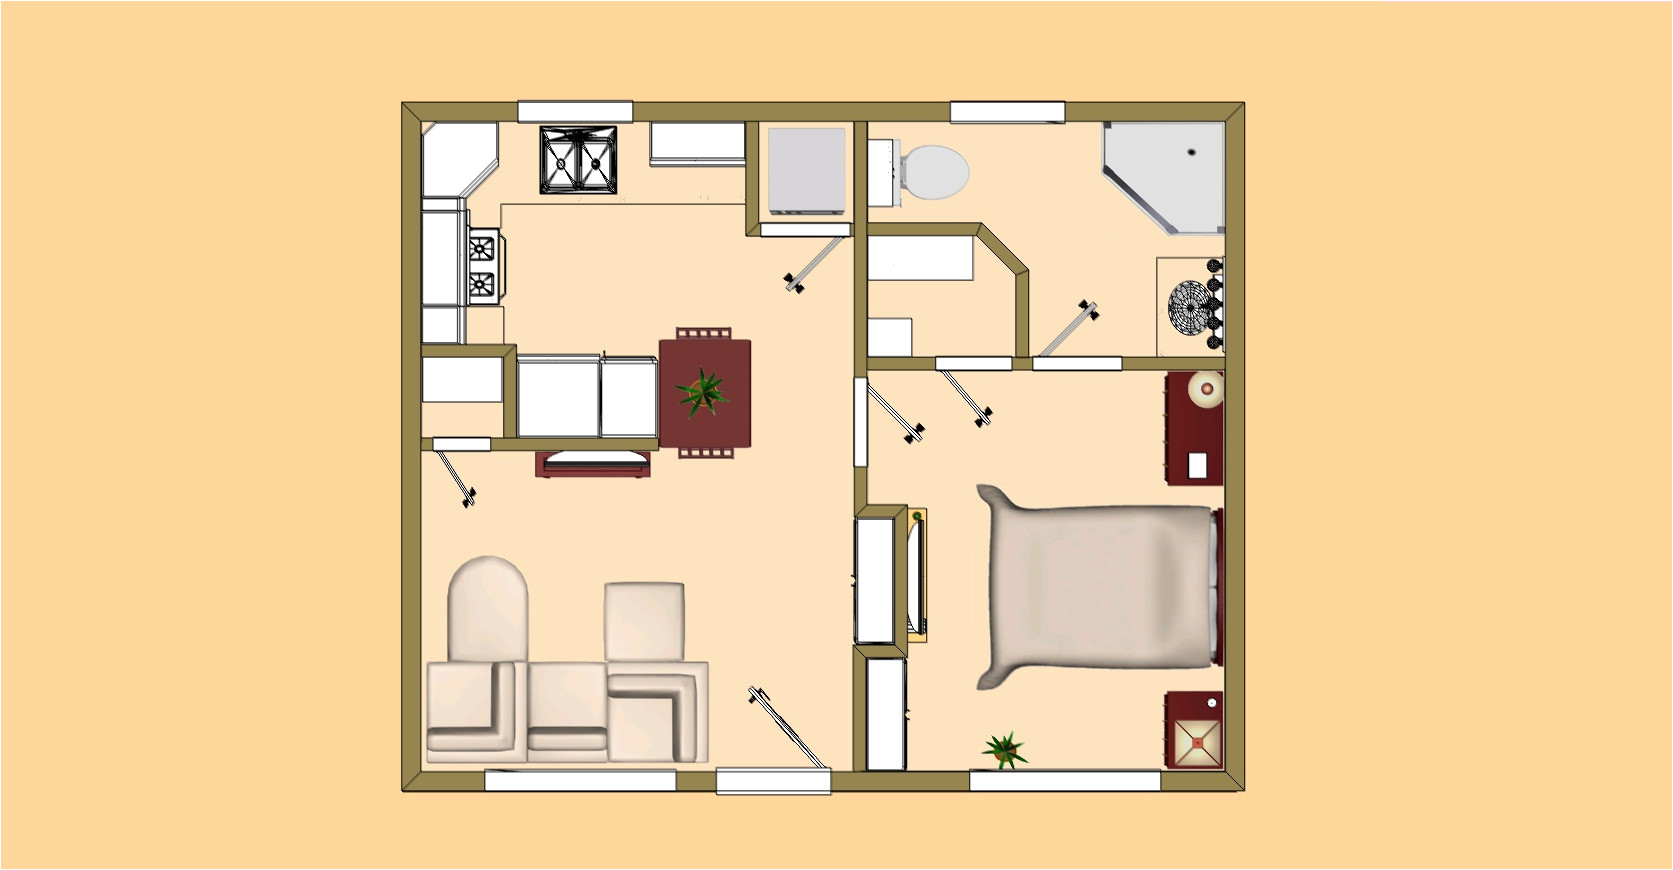 Floor Plans for Homes Under00 Square Feet Small House Plans Under 500 Sq Ft In Kerala Home Deco Plans